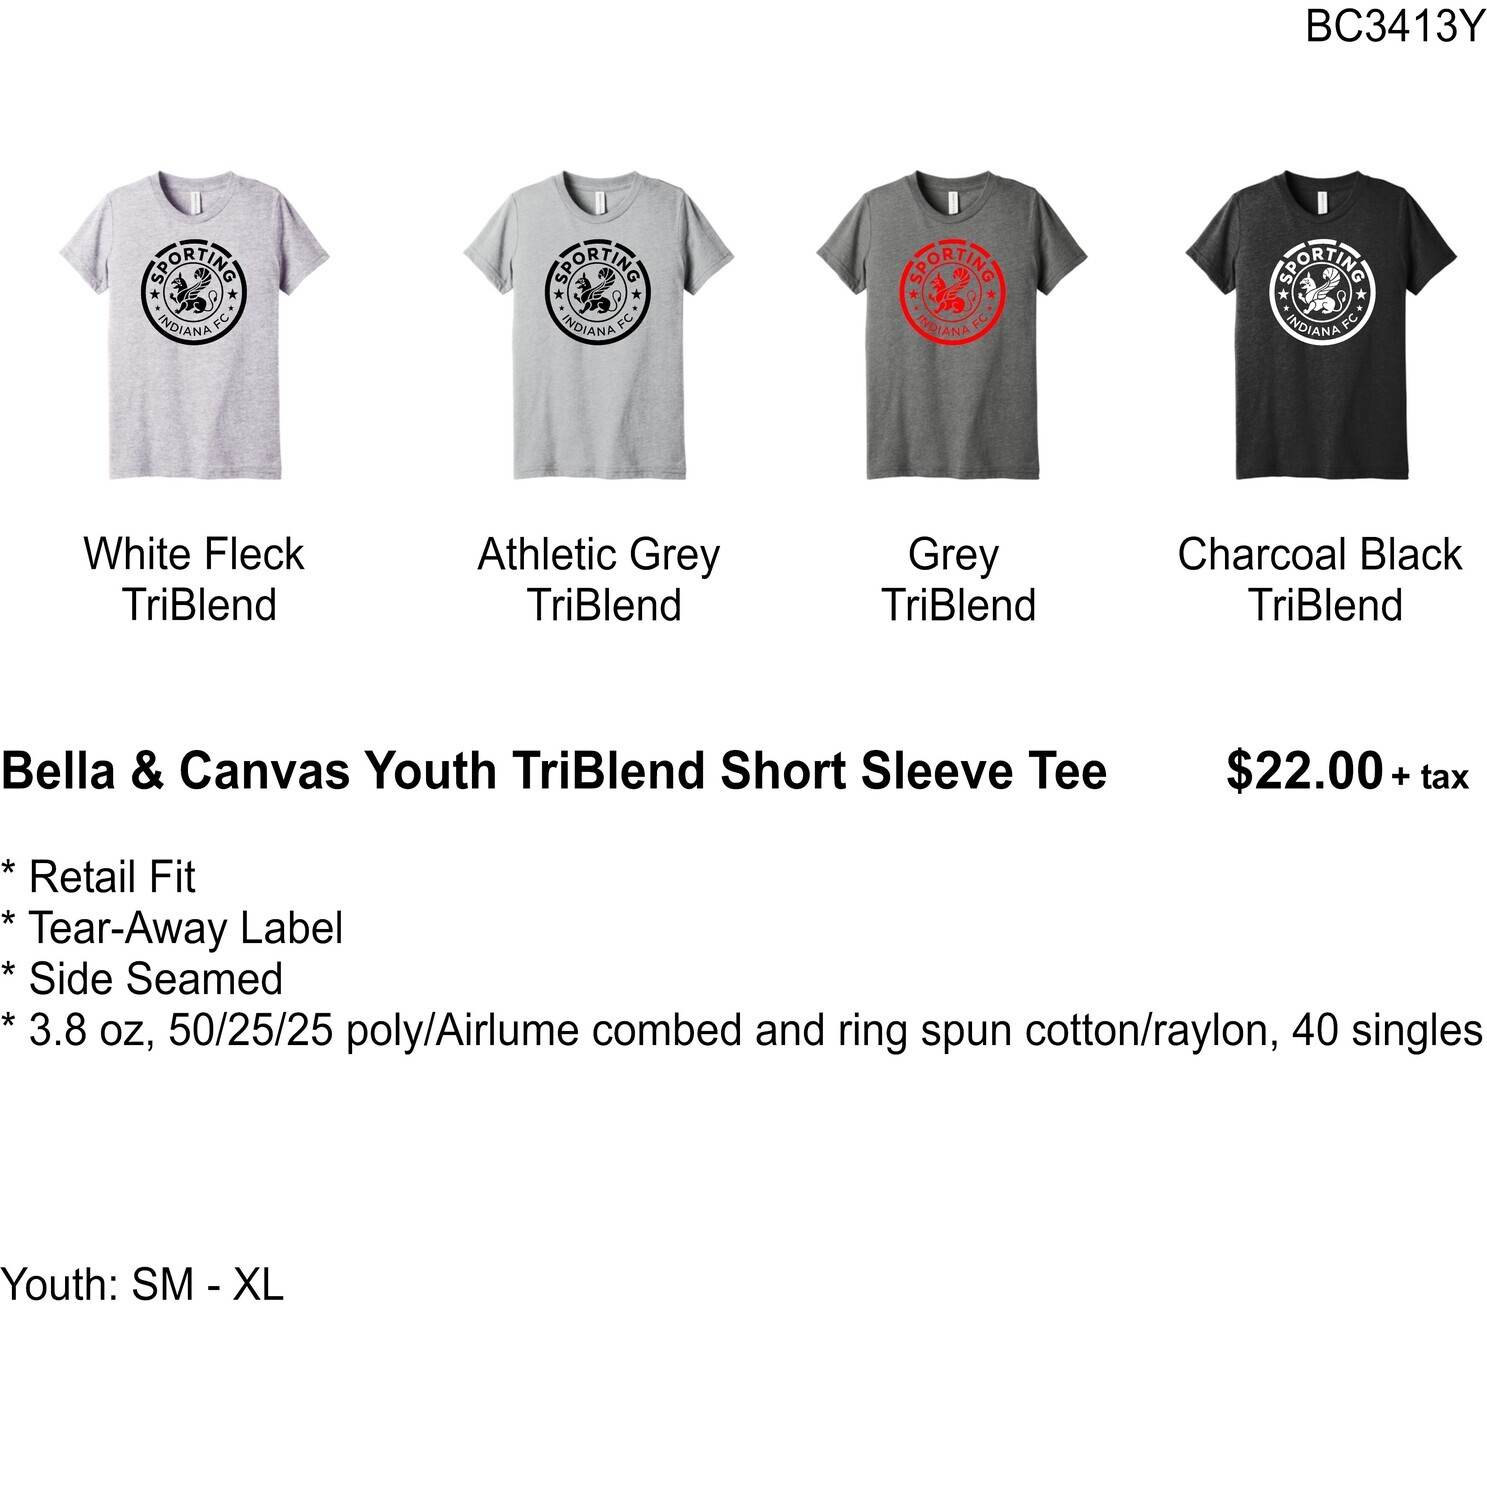 Bella & Canvas Youth TriBlend Short Sleeve Tee